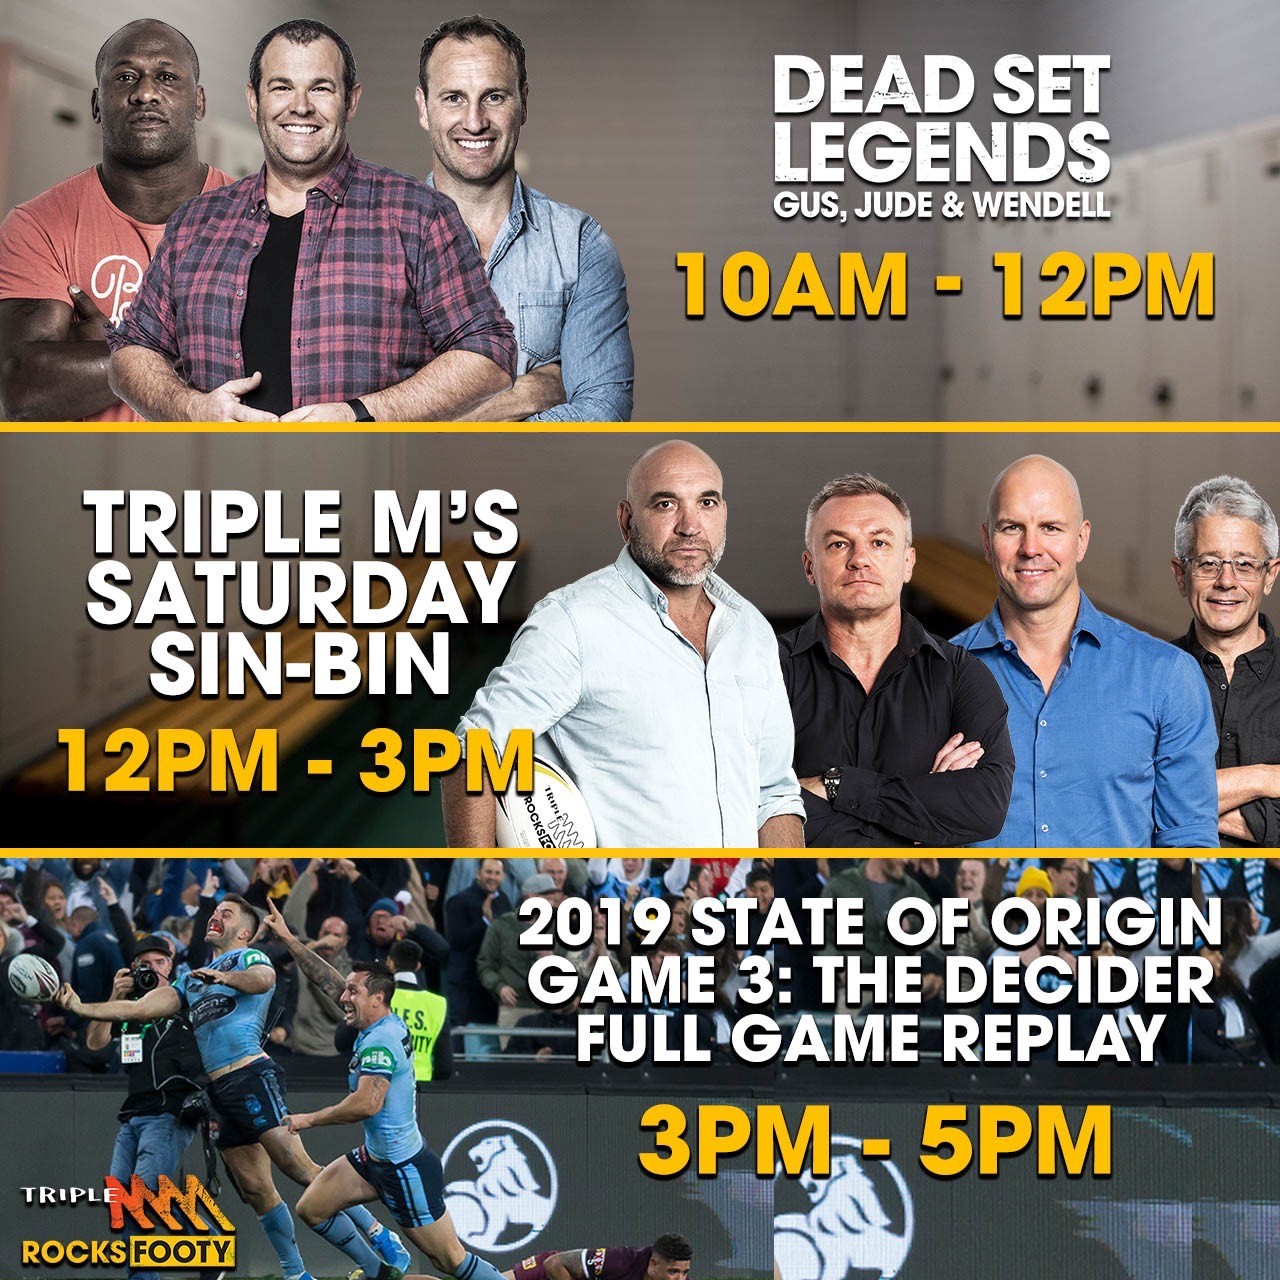 Triple M Footy to continue broadcasting despite sporting postponements